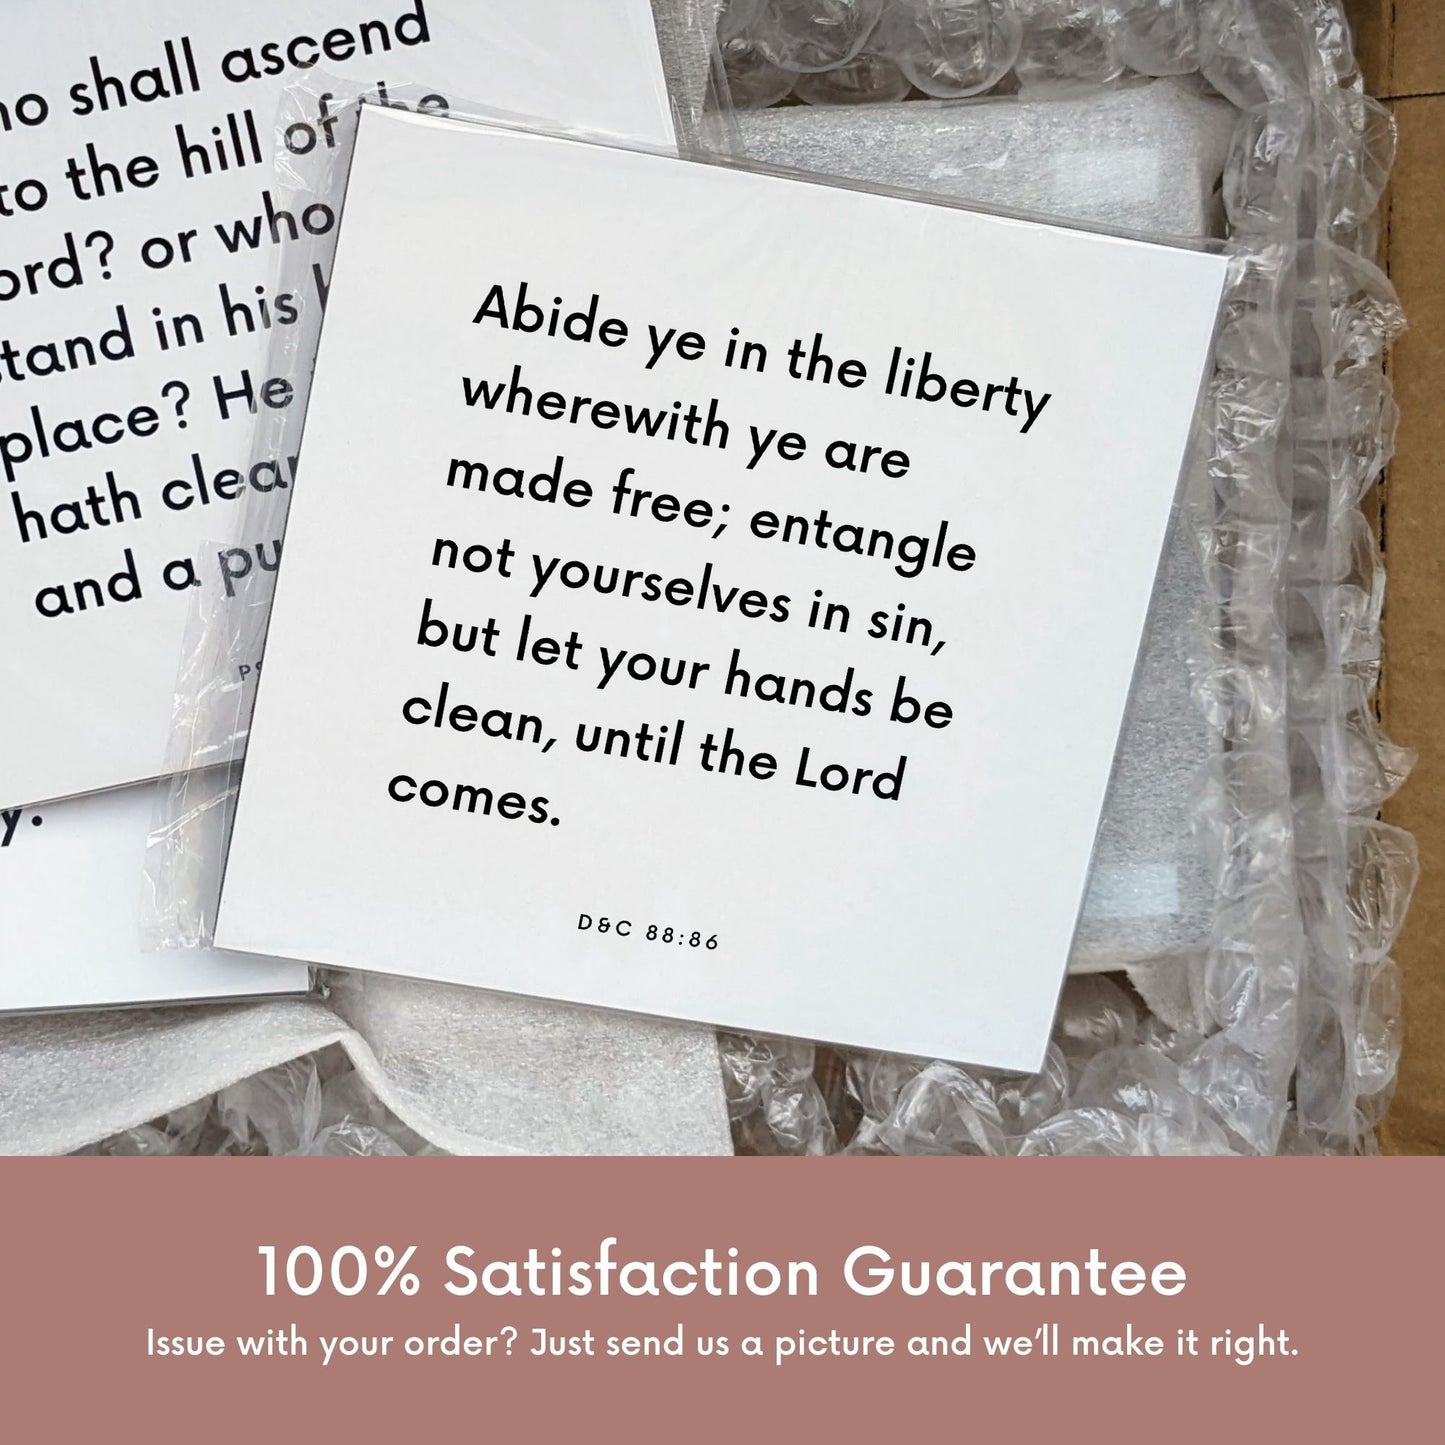 Shipping materials for scripture tile of D&C 88:86 - "Abide ye in the liberty wherewith ye are made free"